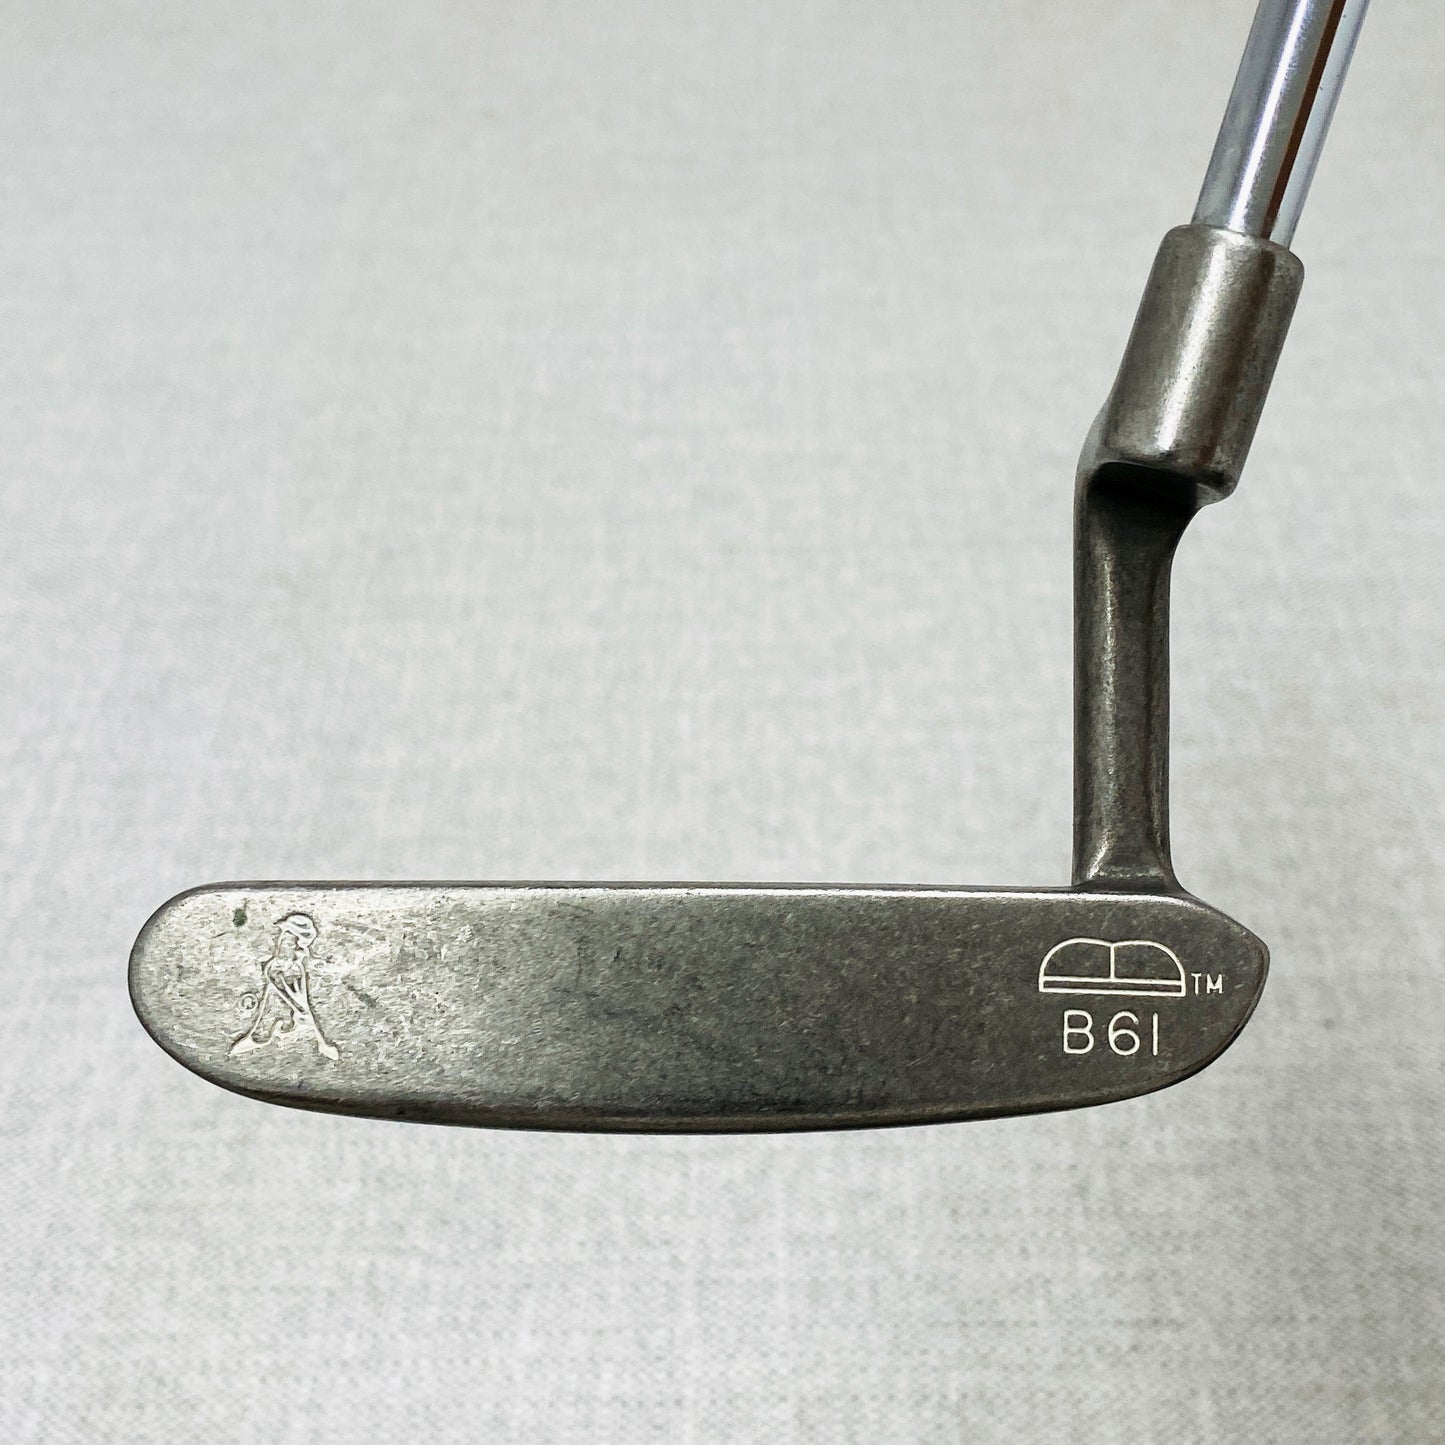 PING B61 Stainless Putter. 34 inch - Very Good Condition # T995